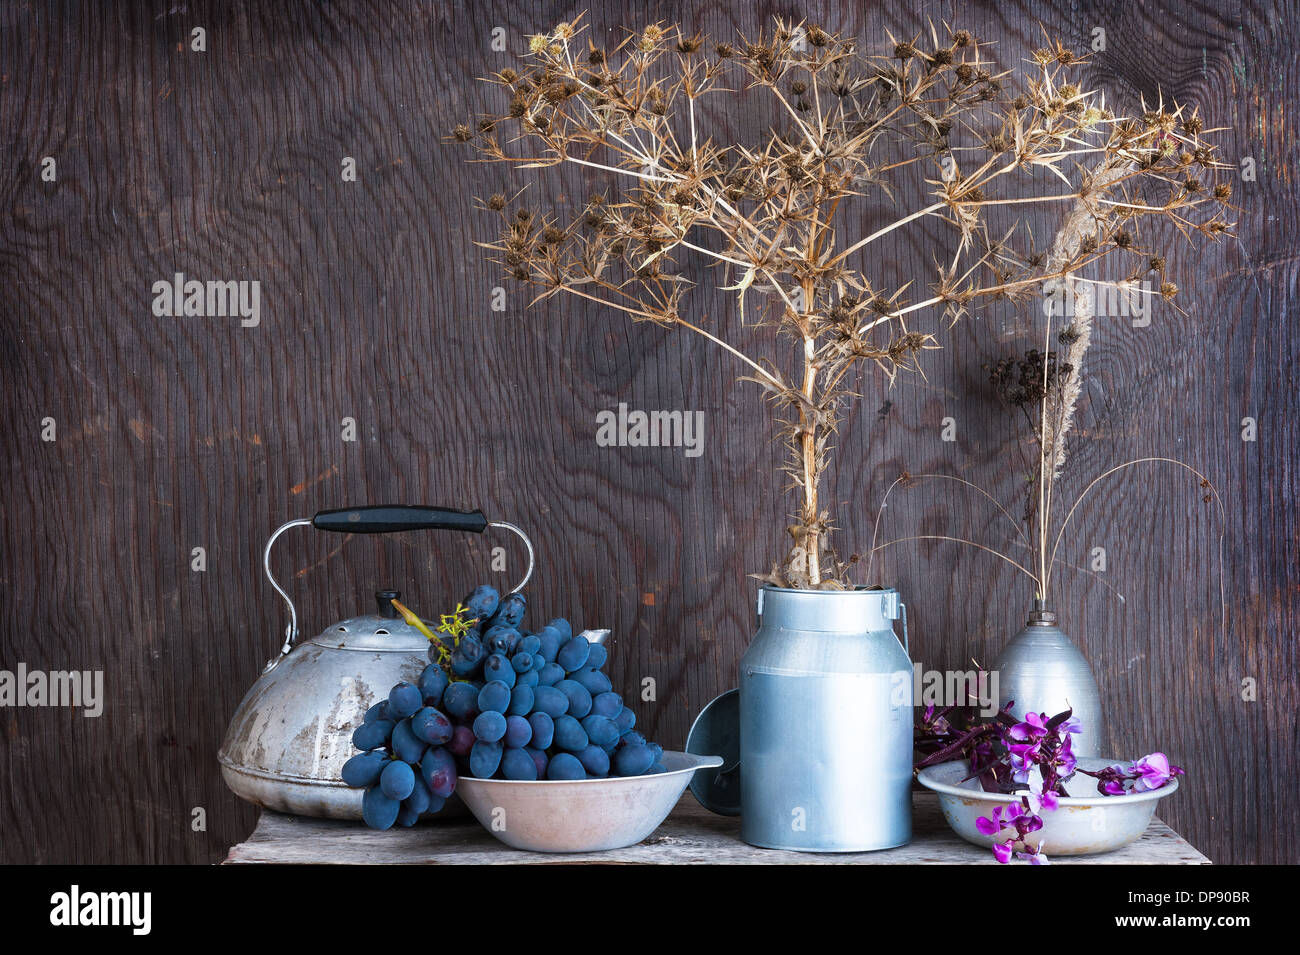 Kitchen utensils on the wooden background with dry autumn prairie flowers Stock Photo